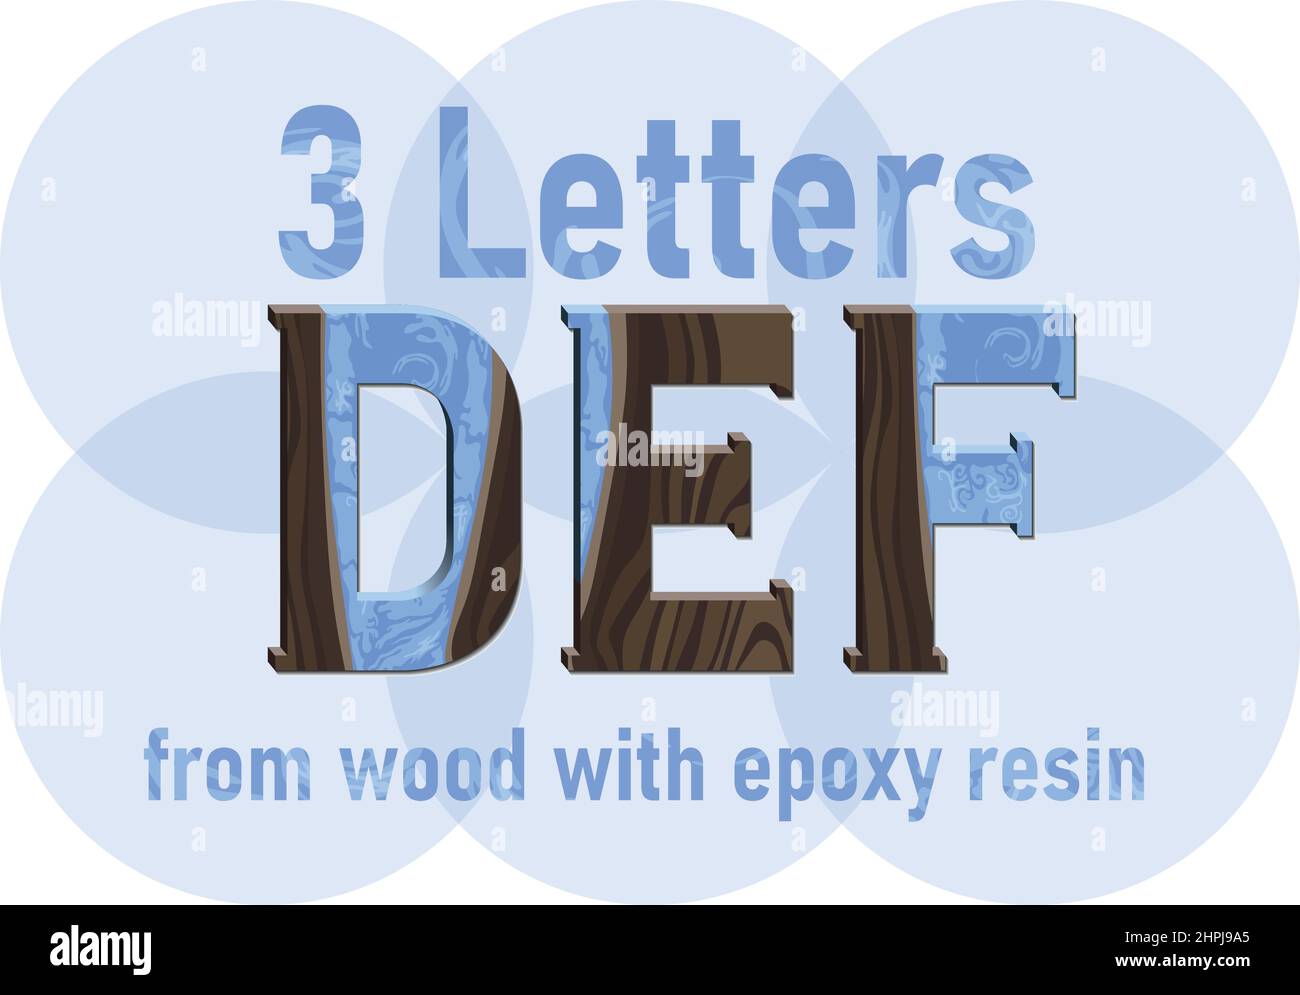 Illustration of letters D, E and F made of wood and epoxy resin on a white background. Wood and blue epoxy resin, epoxy resin countertop, ready to use Stock Vector